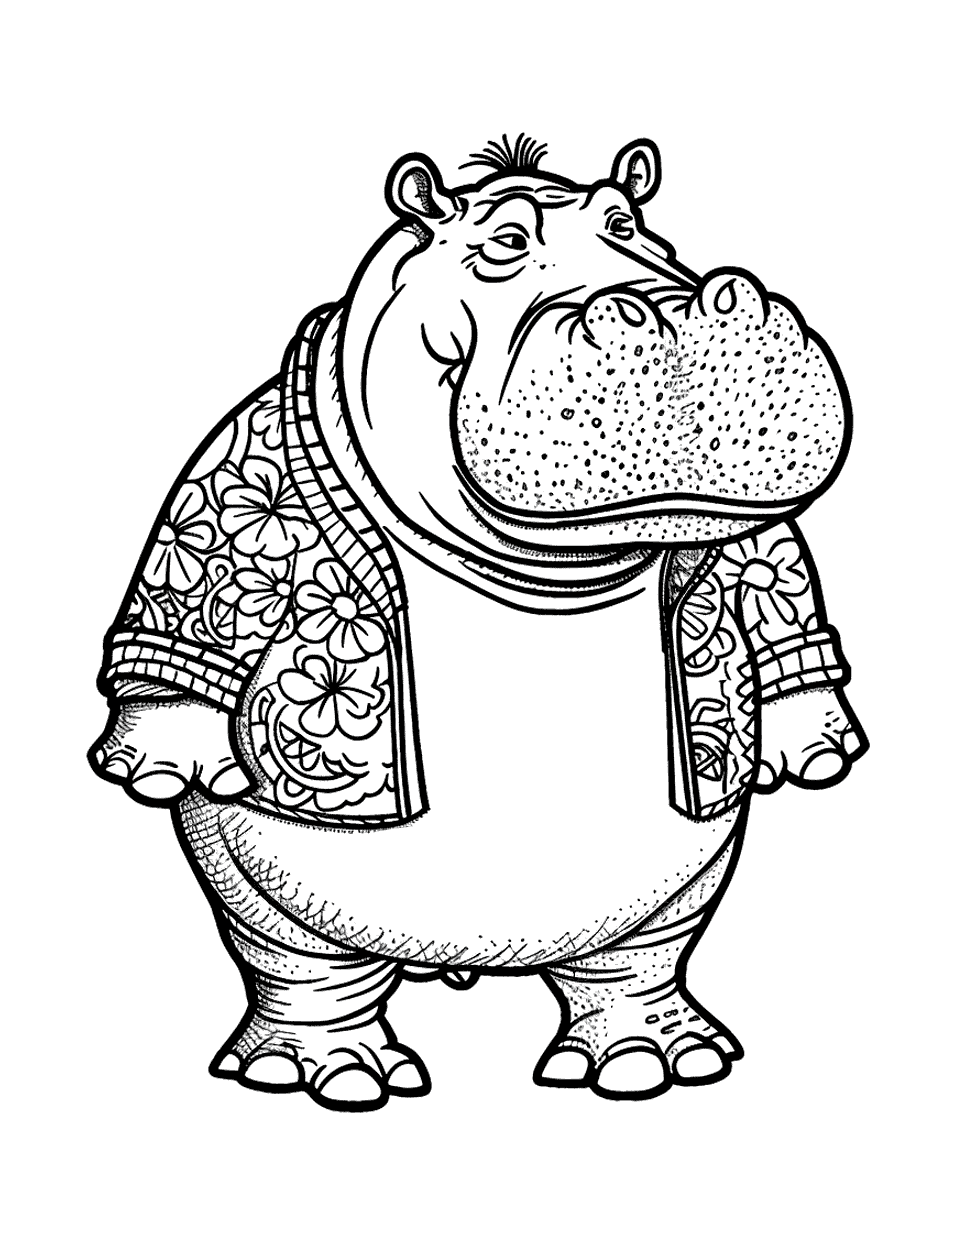 Hippo Fashion Show Coloring Page - Hippo modeling trendy outfit on a fashion show.